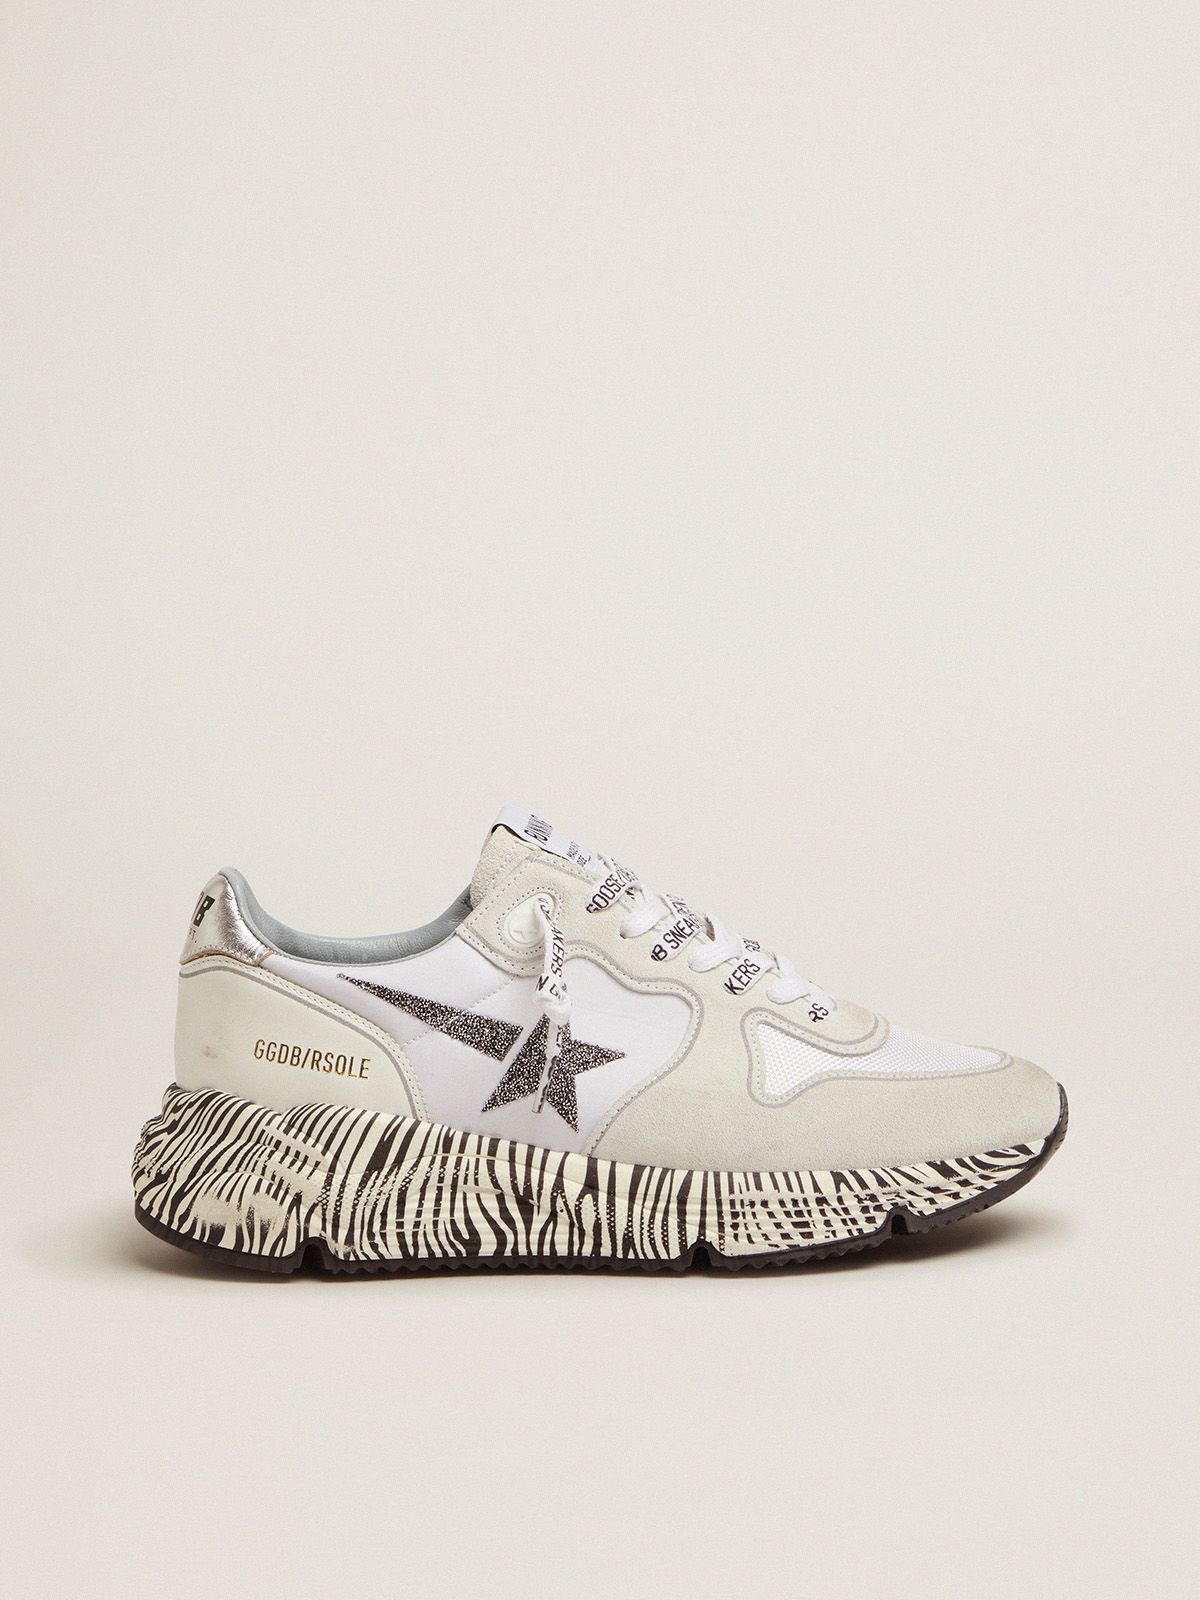 Running Sole sneakers with zebra-print sole and crystals | 